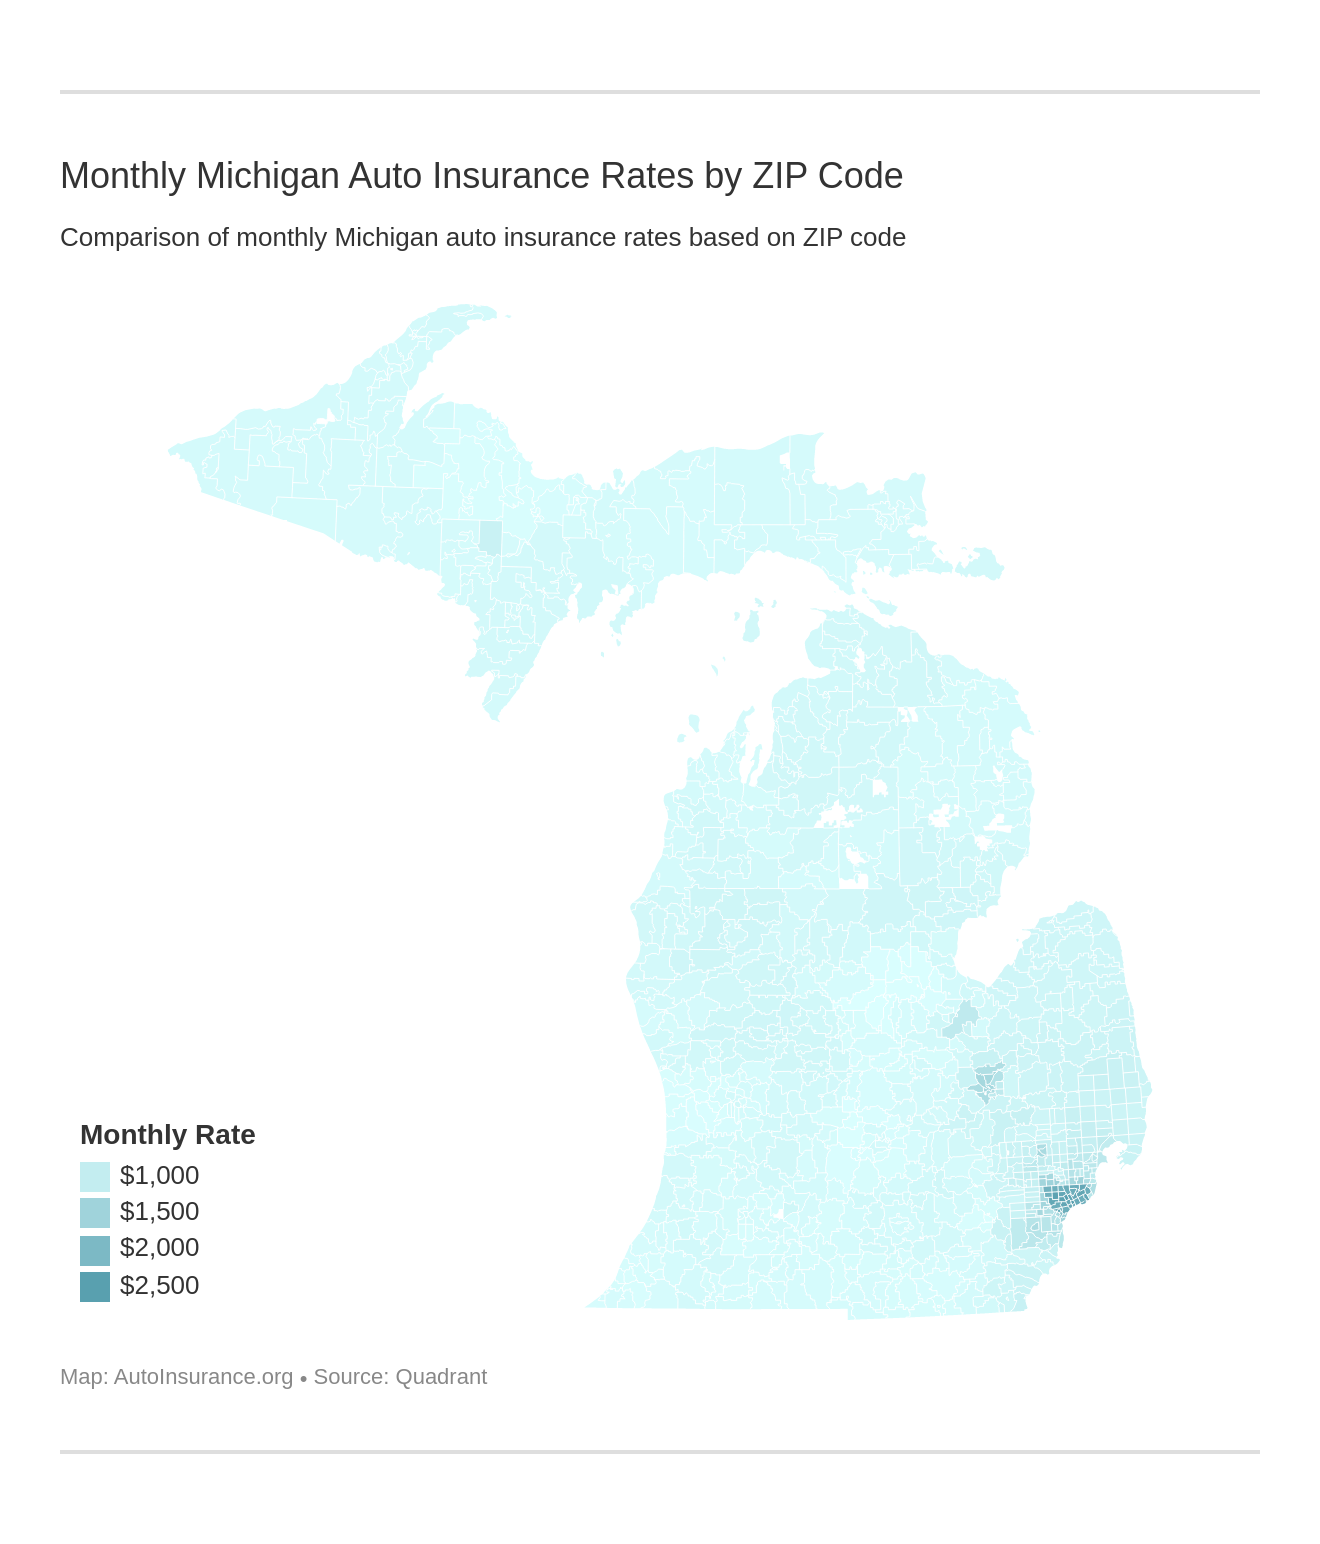 Monthly Michigan Auto Insurance Rates by ZIP Code